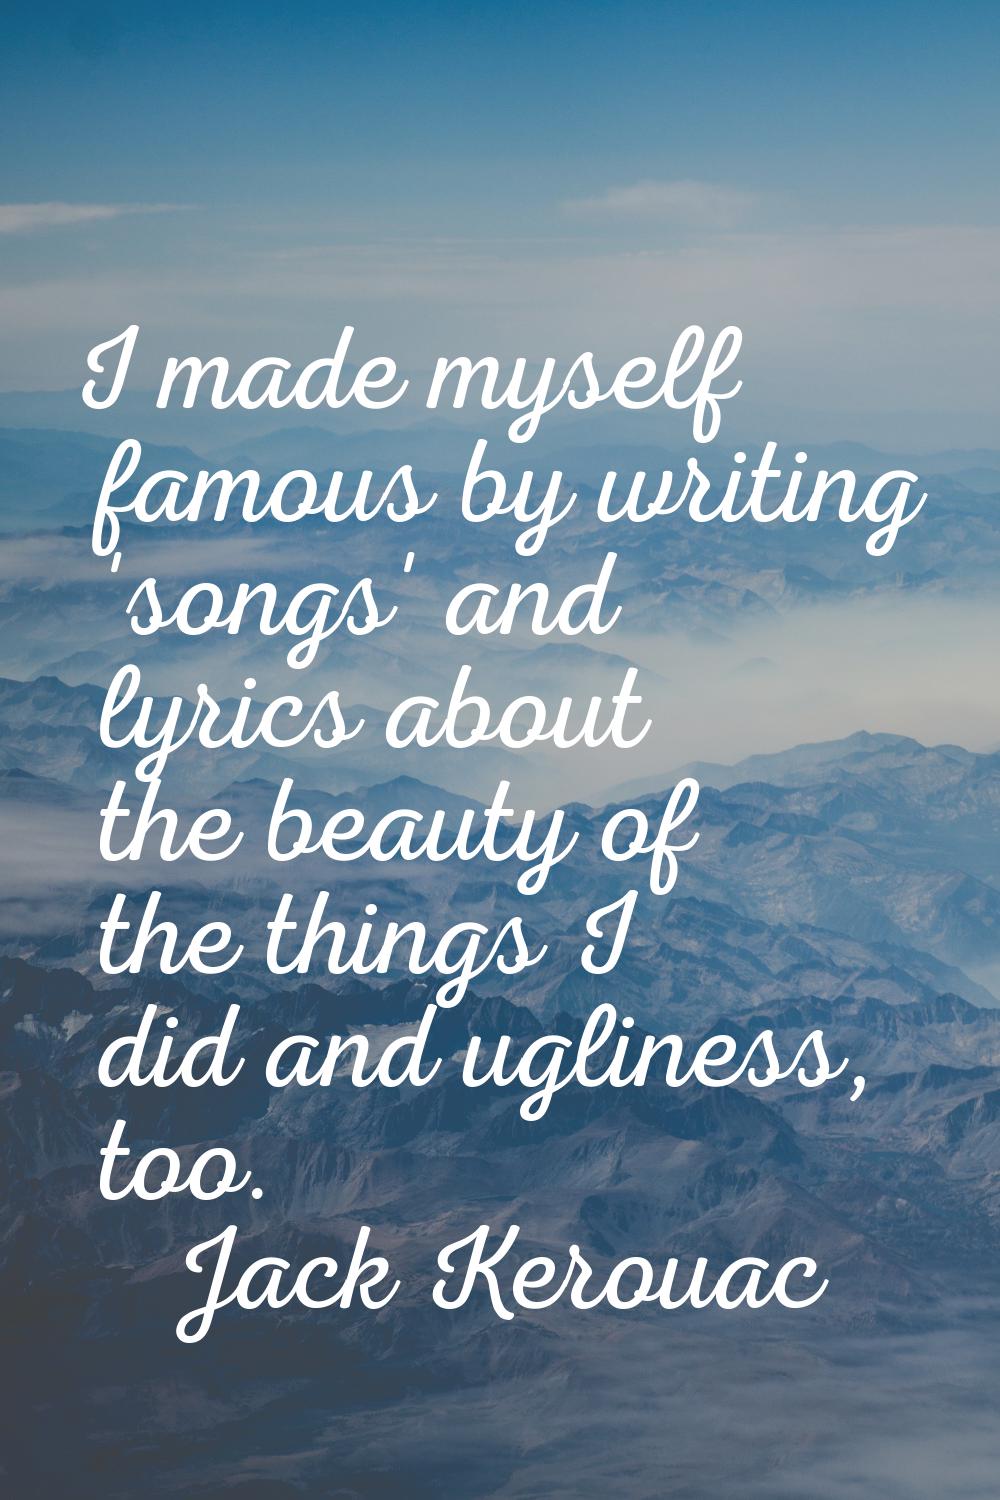 I made myself famous by writing 'songs' and lyrics about the beauty of the things I did and uglines